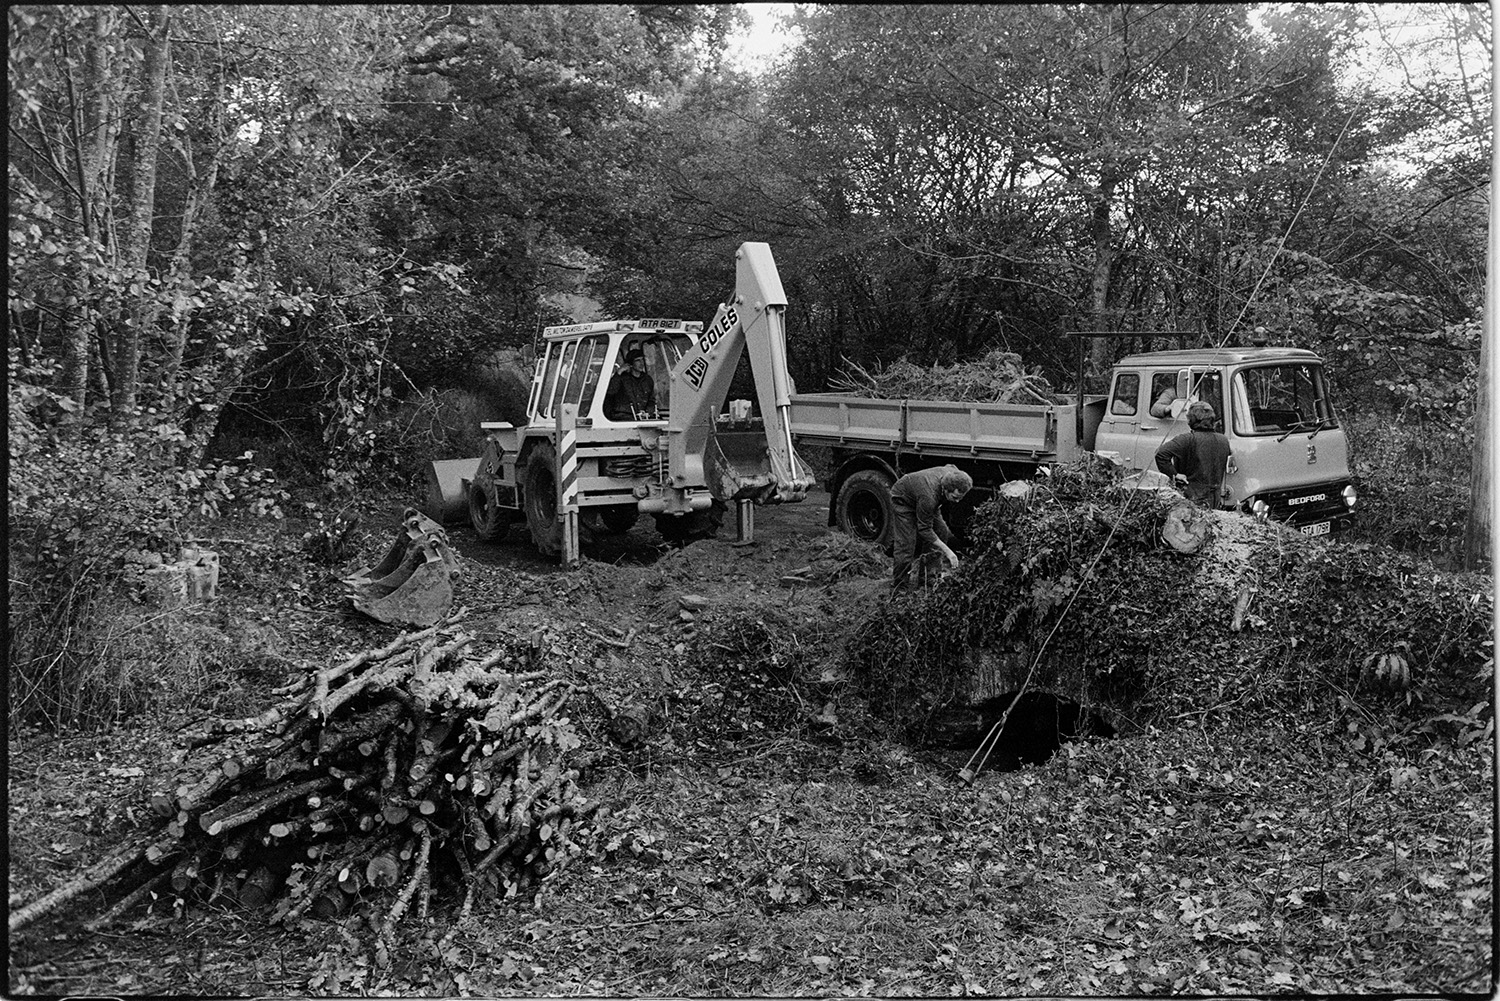 Men clearing round bridge before repairing it. 
[Men clearing foliage and trees, using a JCB digger and a lorry, near a bridge before repairing it at Addisford, Dolton. A woodpile can be seen in the foreground.]